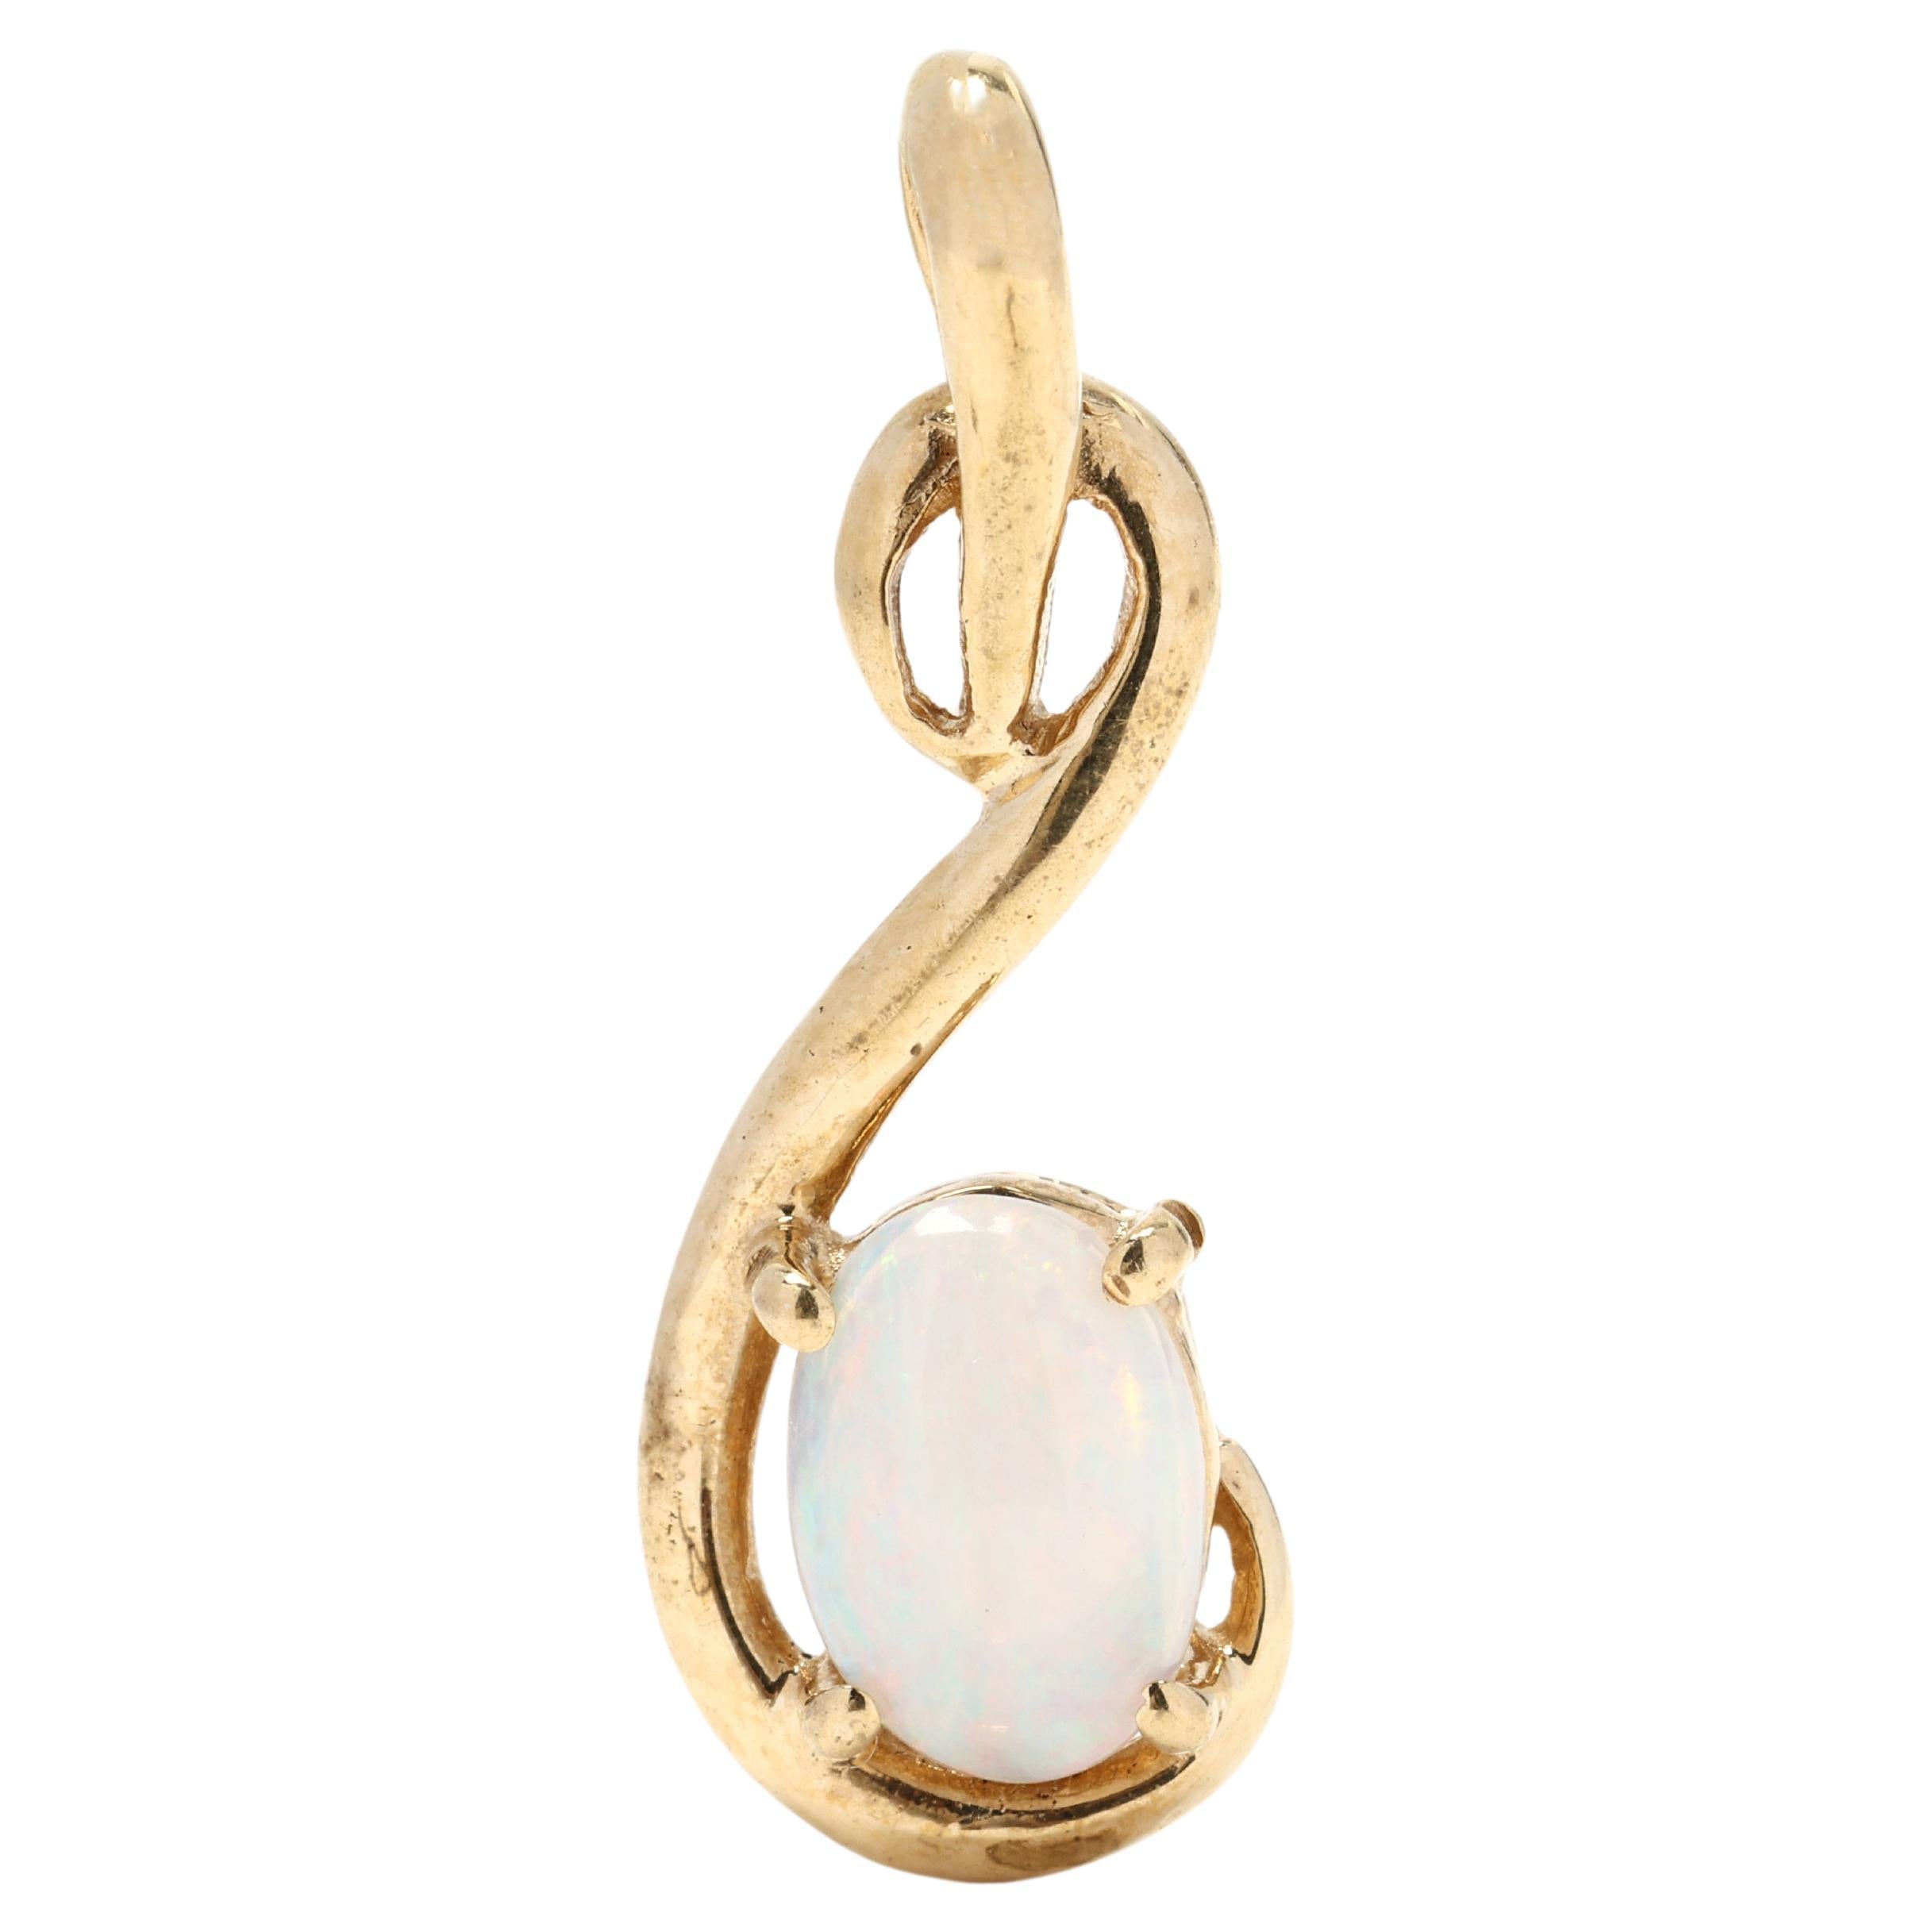 Opal Twisted Pendant, 14k Yellow Gold, Length .75 Inches, Sparkle Stone